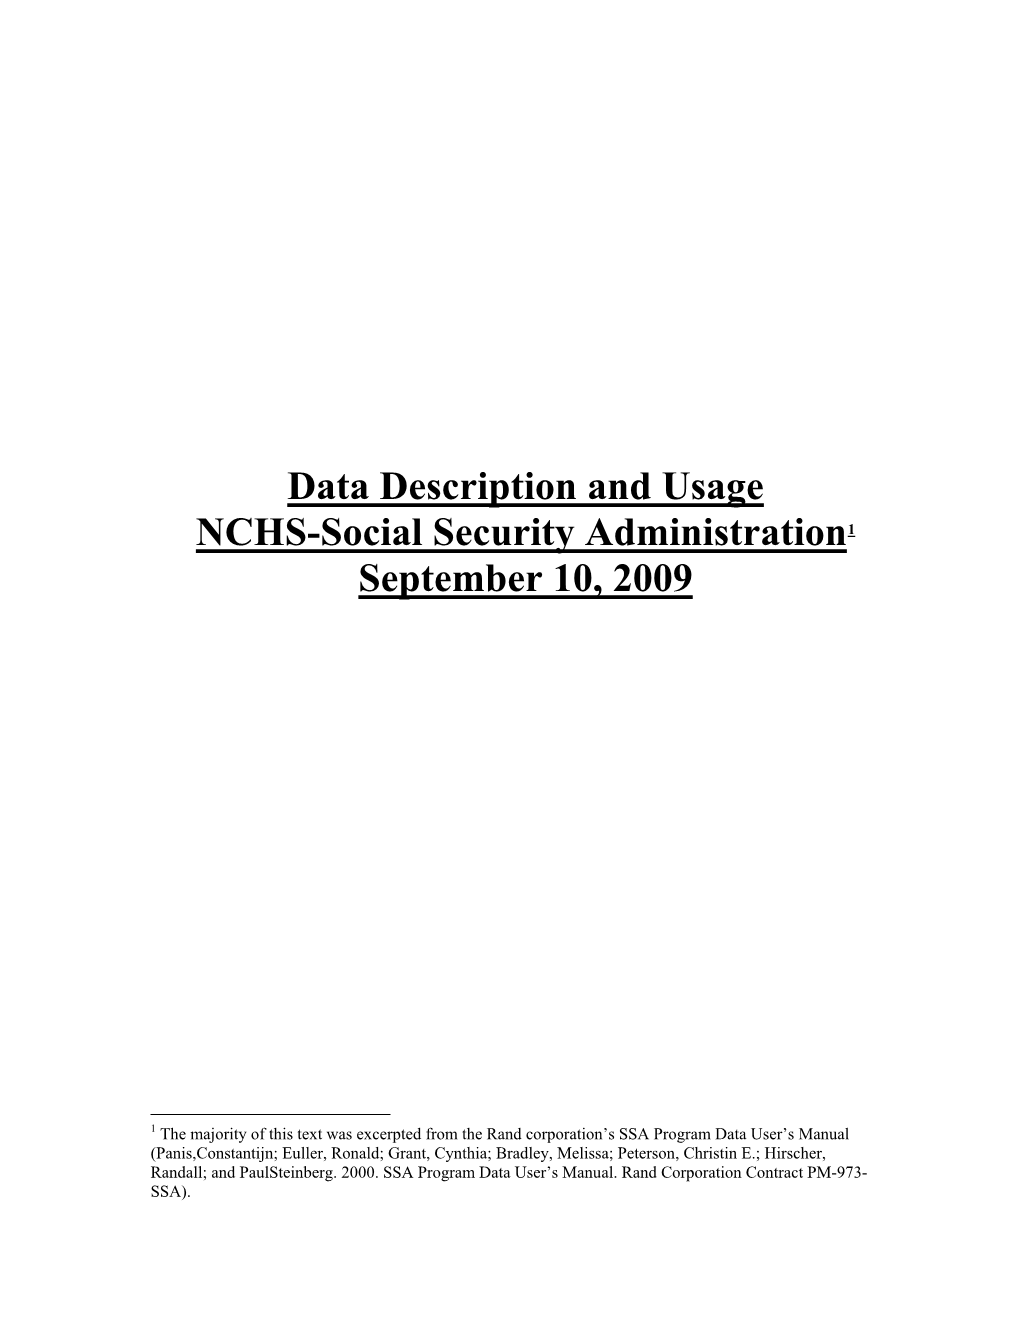 Data Description and Usage NCHS-SSA